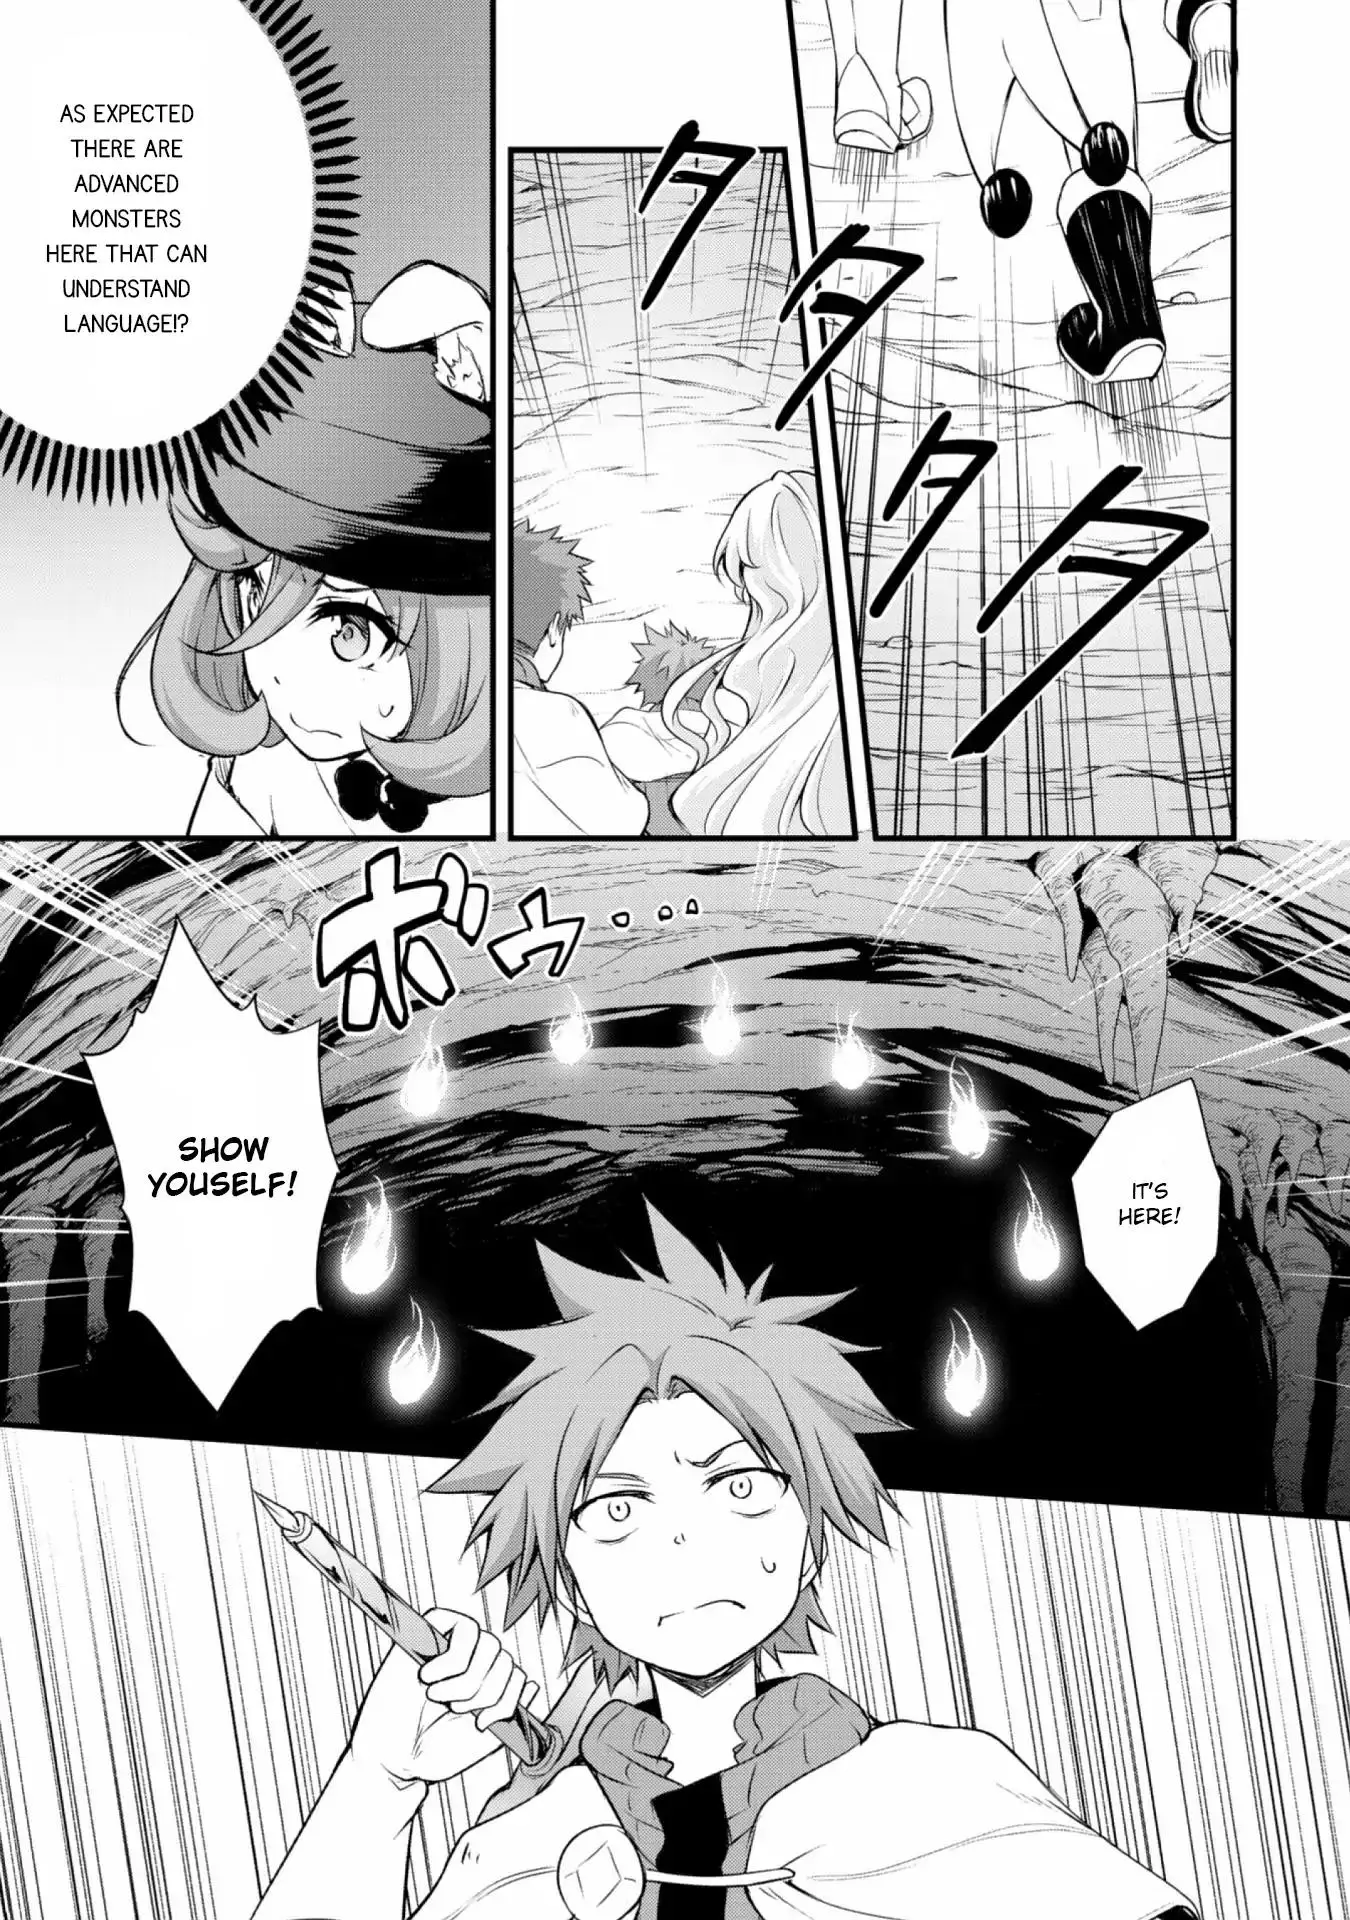 Tensei Shitara Slime Datta Ken: The Ways of Strolling in the Demon Country - 14 page 14